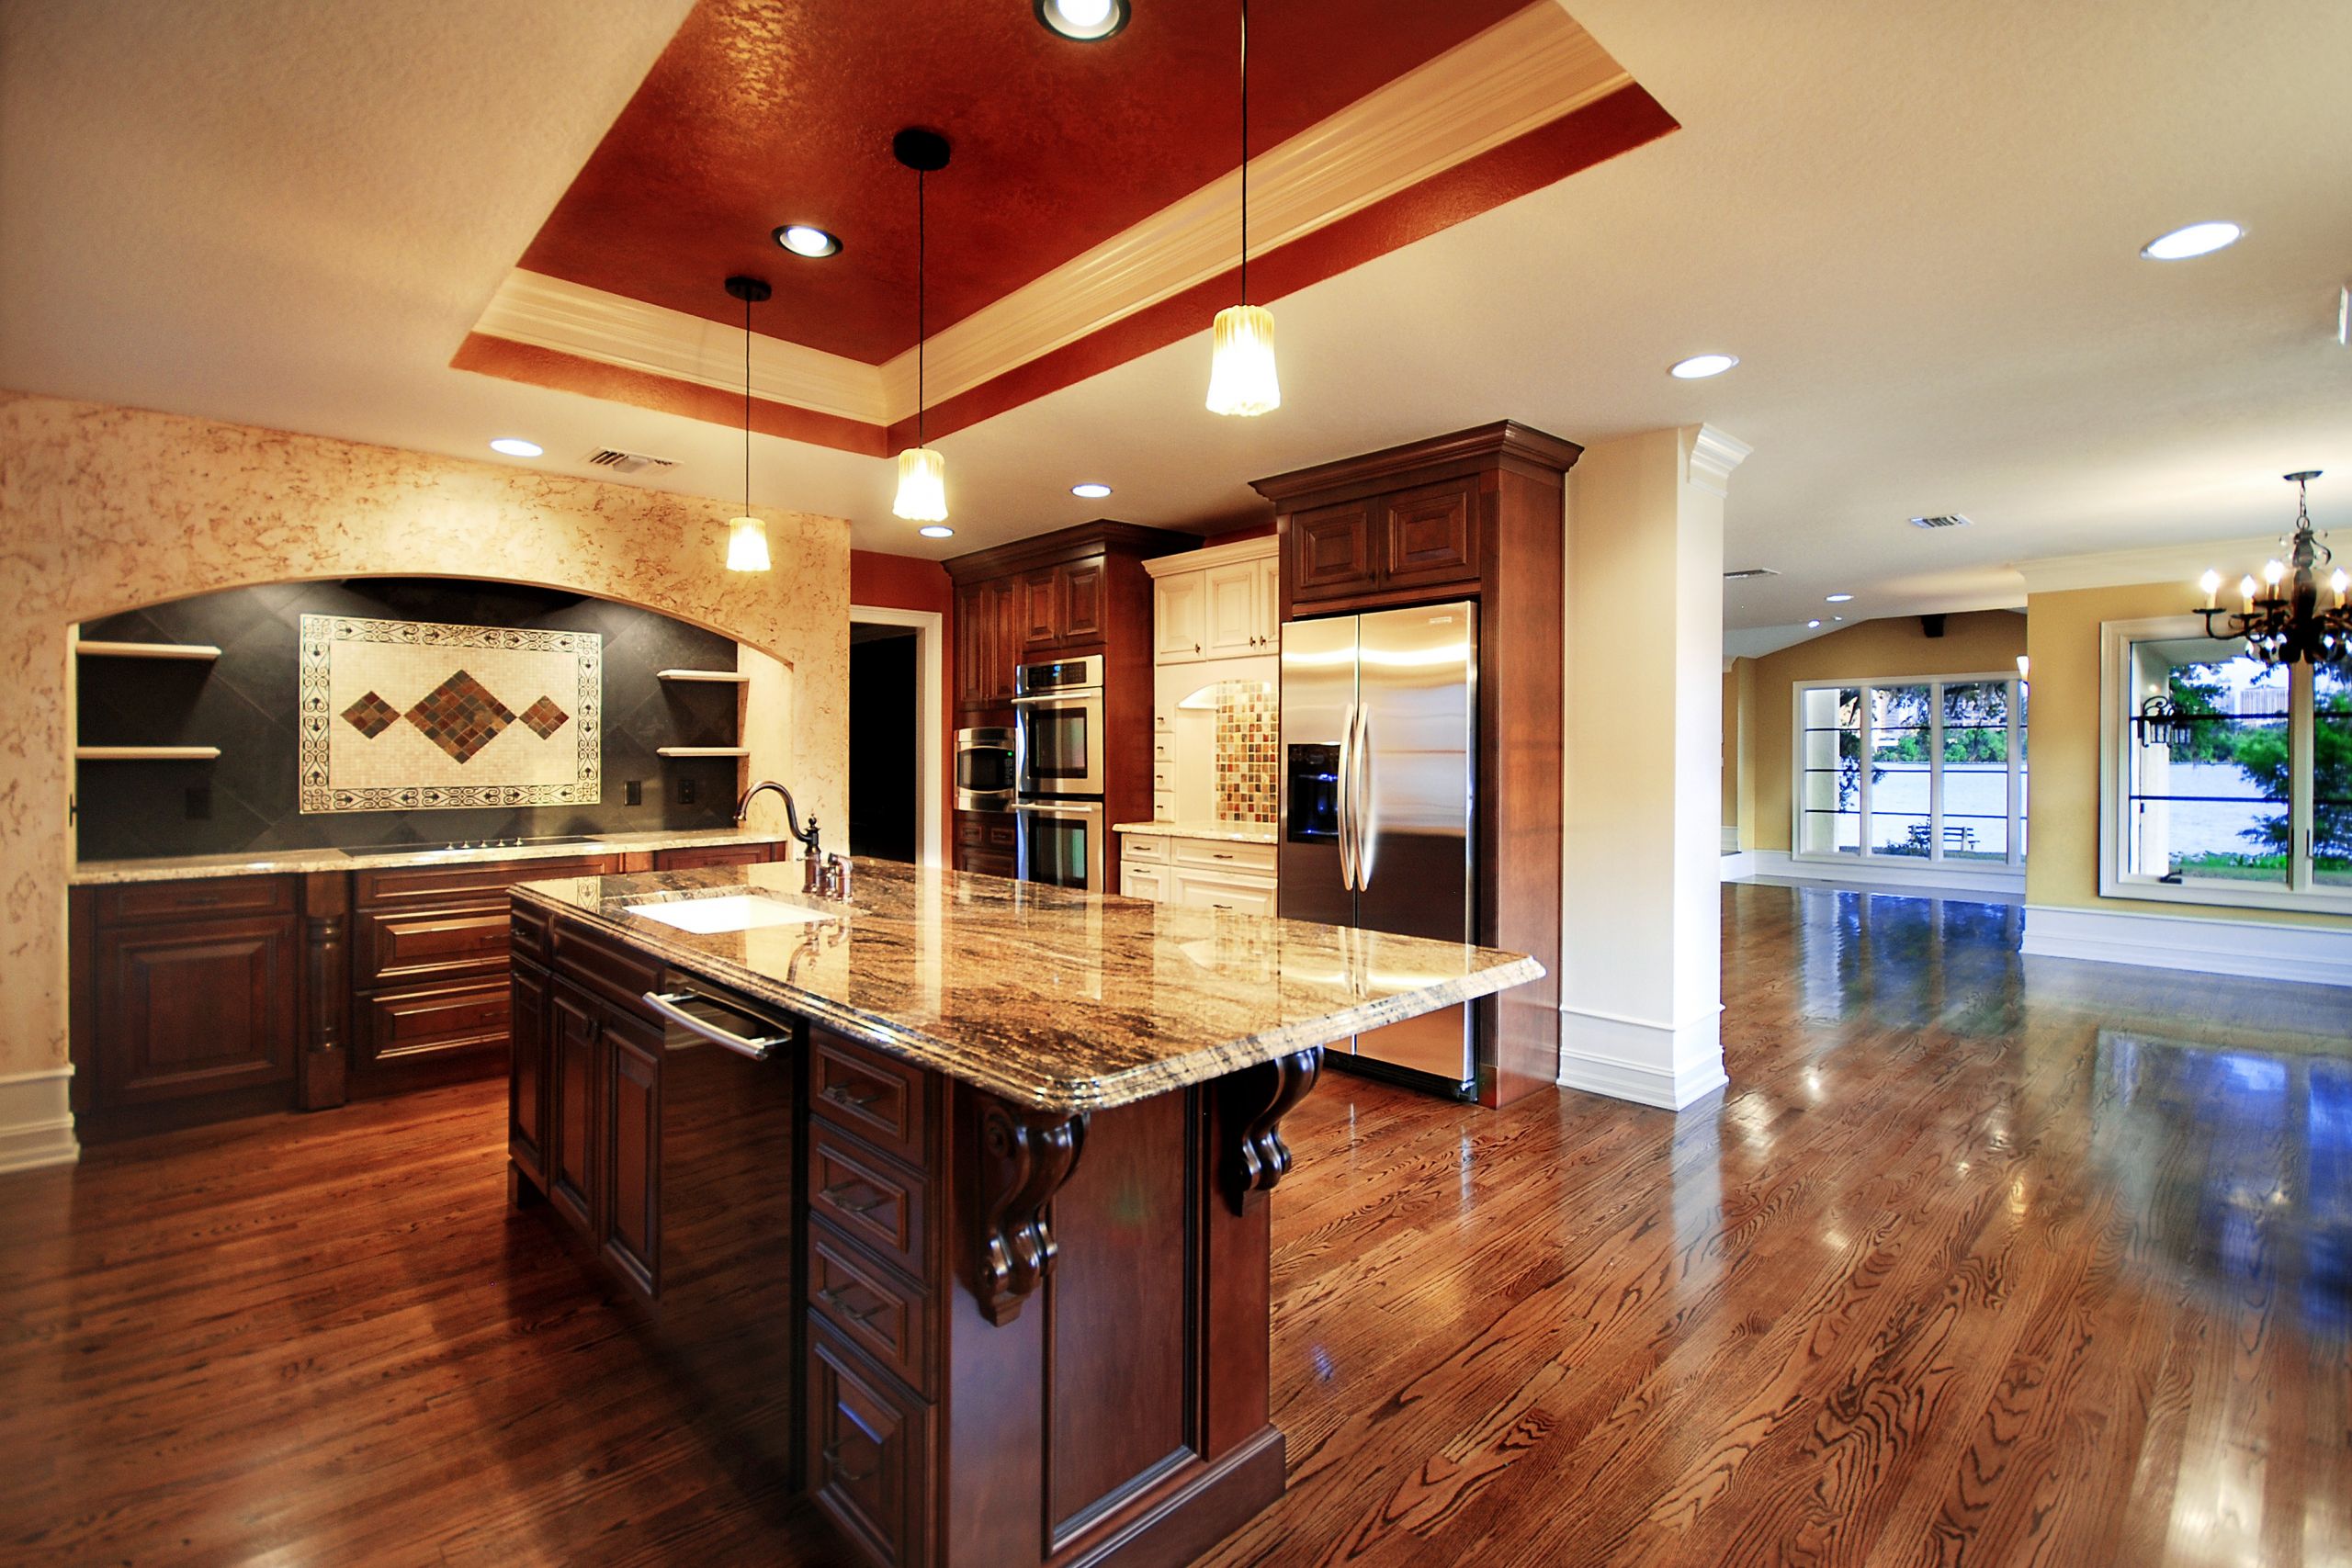 Remodeling Your Kitchen
 How to Plan and Design Your Kitchen Renovation